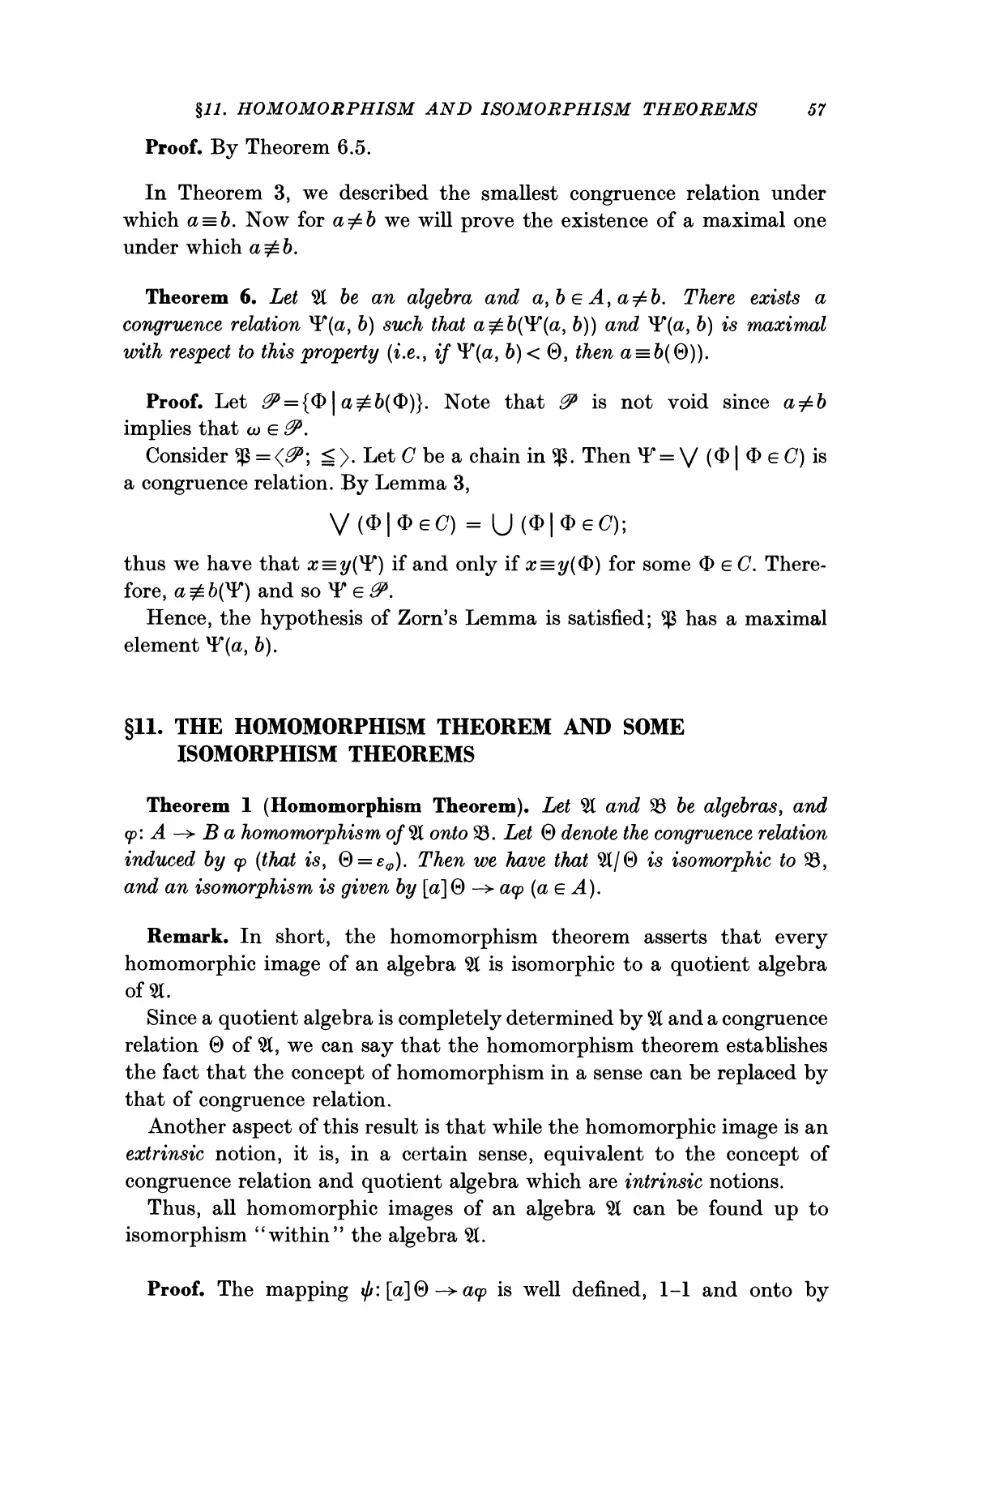 §11. The Homomorphism Theorem and Some Isomorphism Theorems